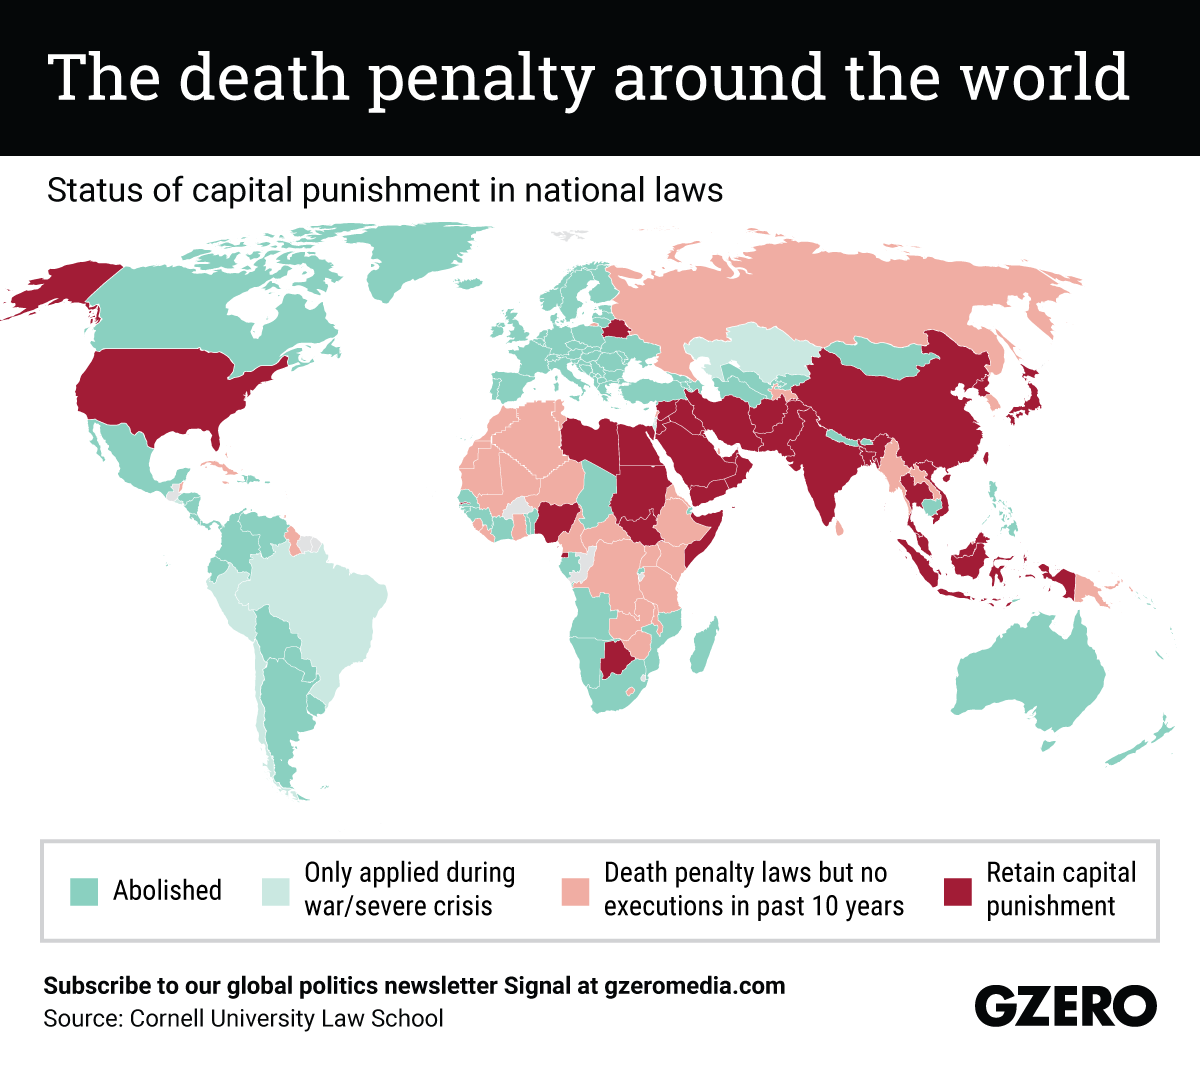 The Graphic Truth: The death penalty around the world